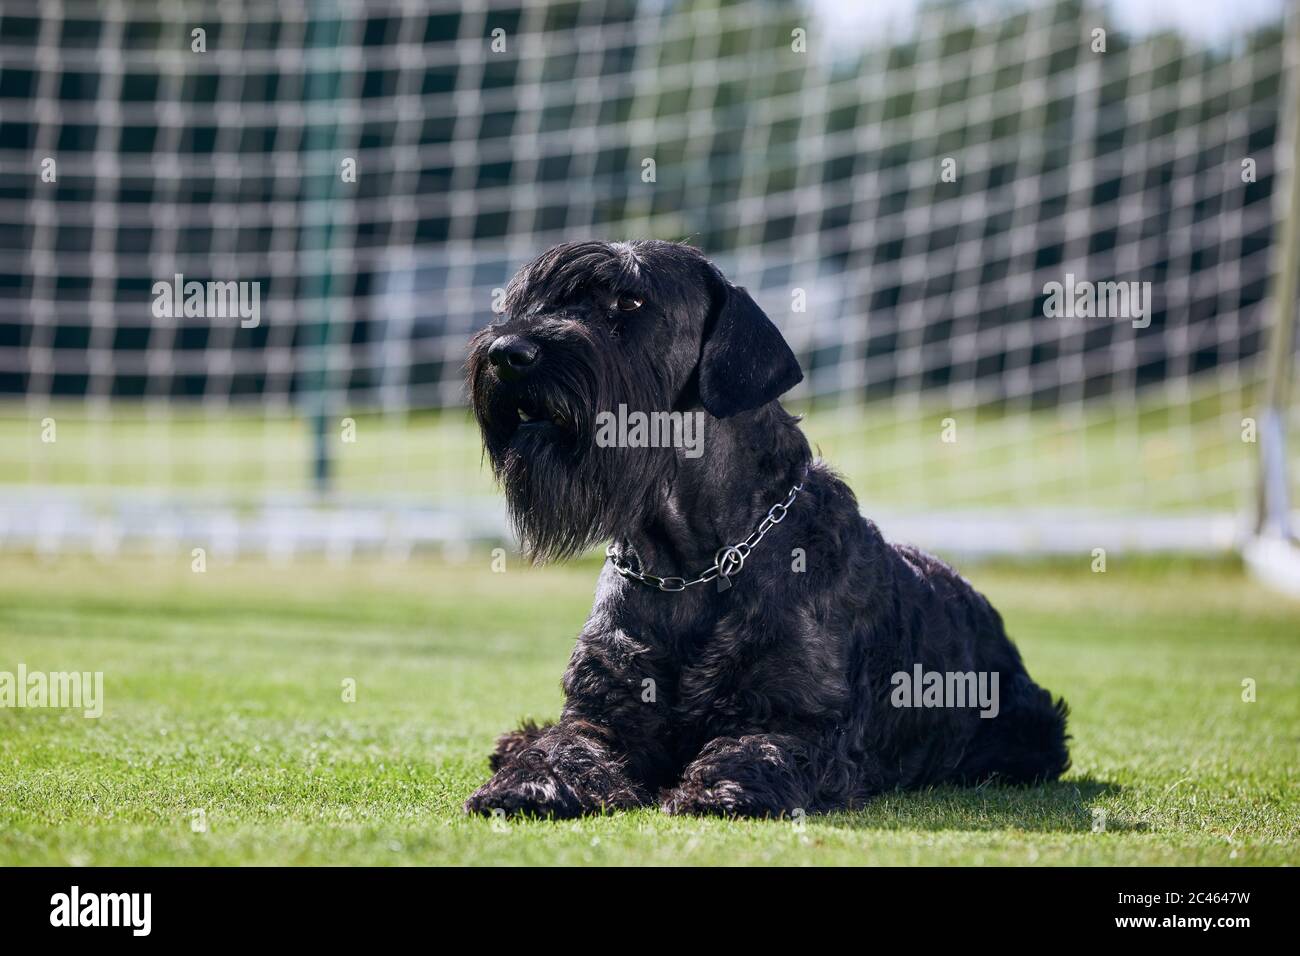 Portrait of Giant Schnauzer. Large purebred dog posing in soccer goal. Stock Photo